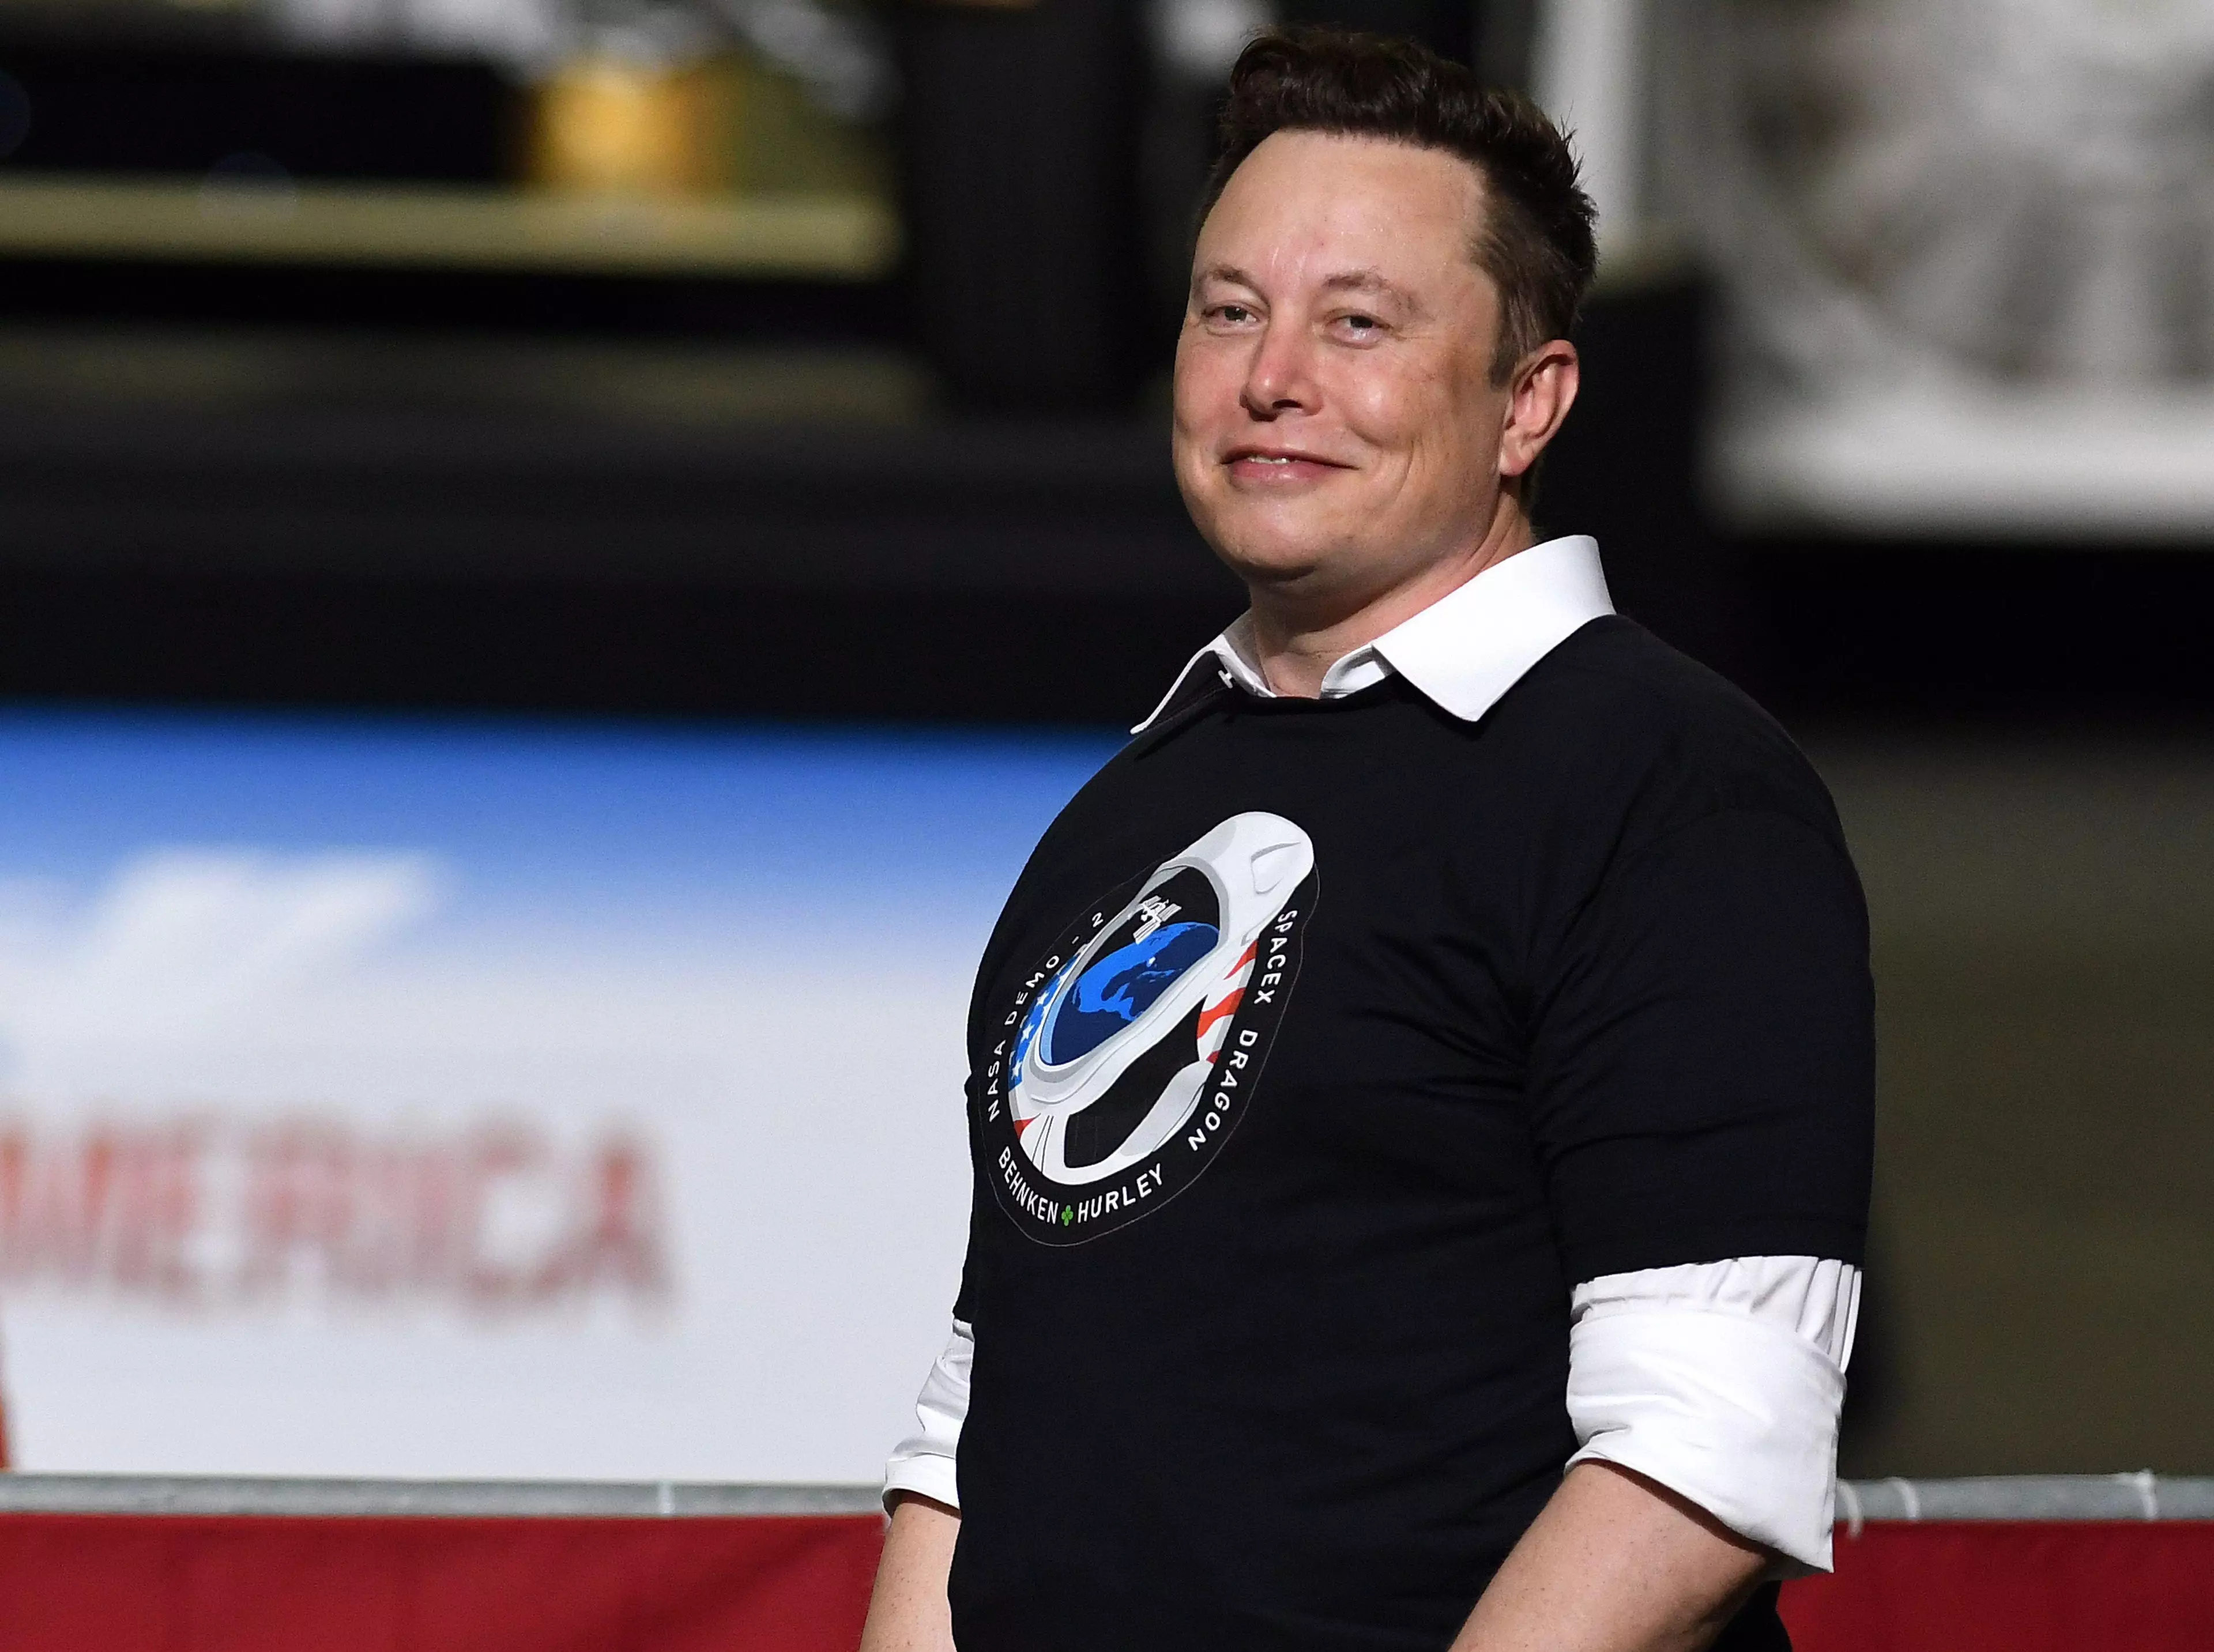 Elon Musk is set to become a trillionaire in two years.